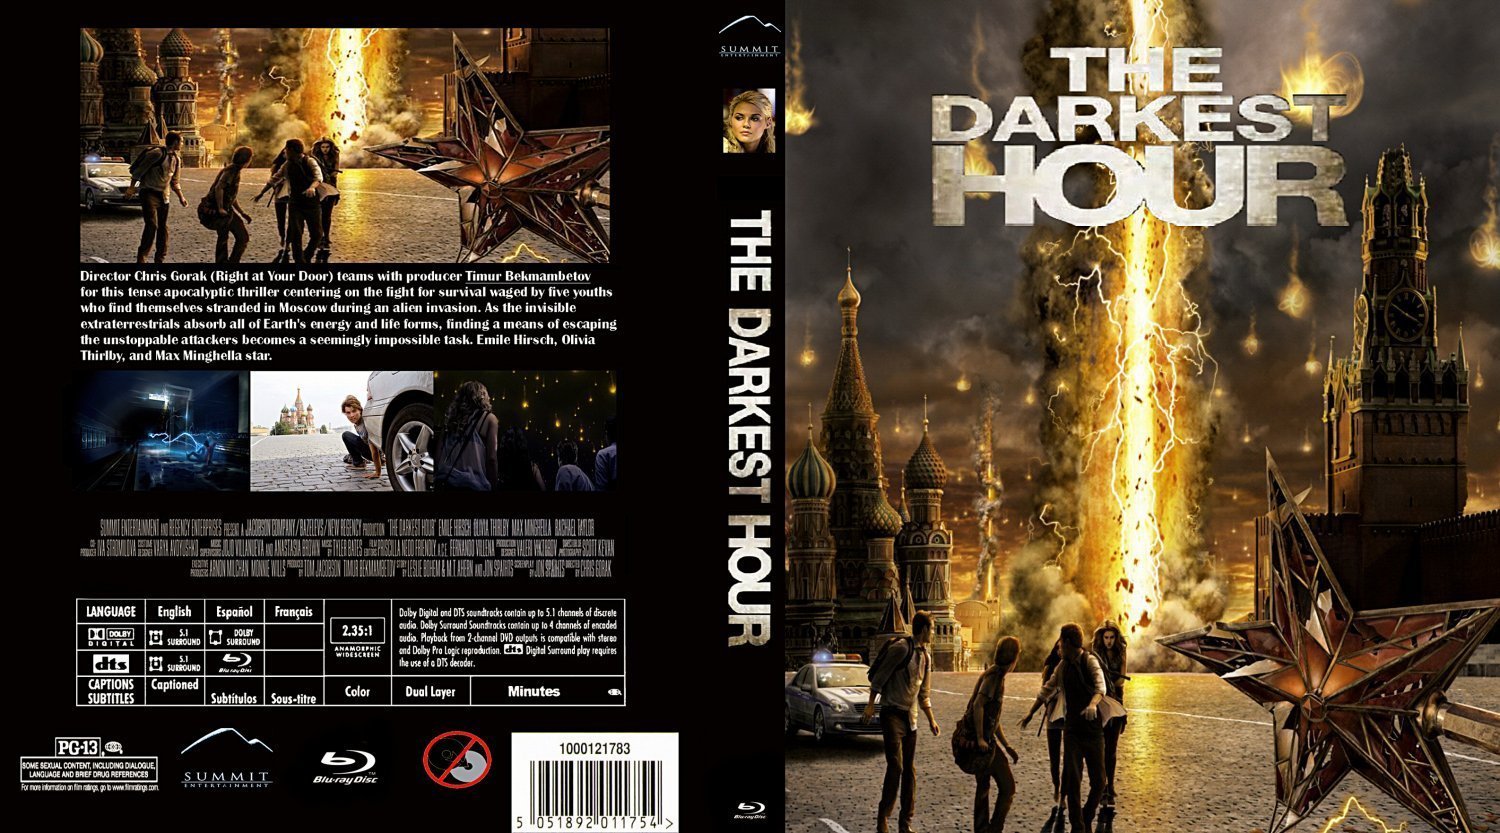 The Darkest Hour 2011 BD | Dvd Covers and Labels